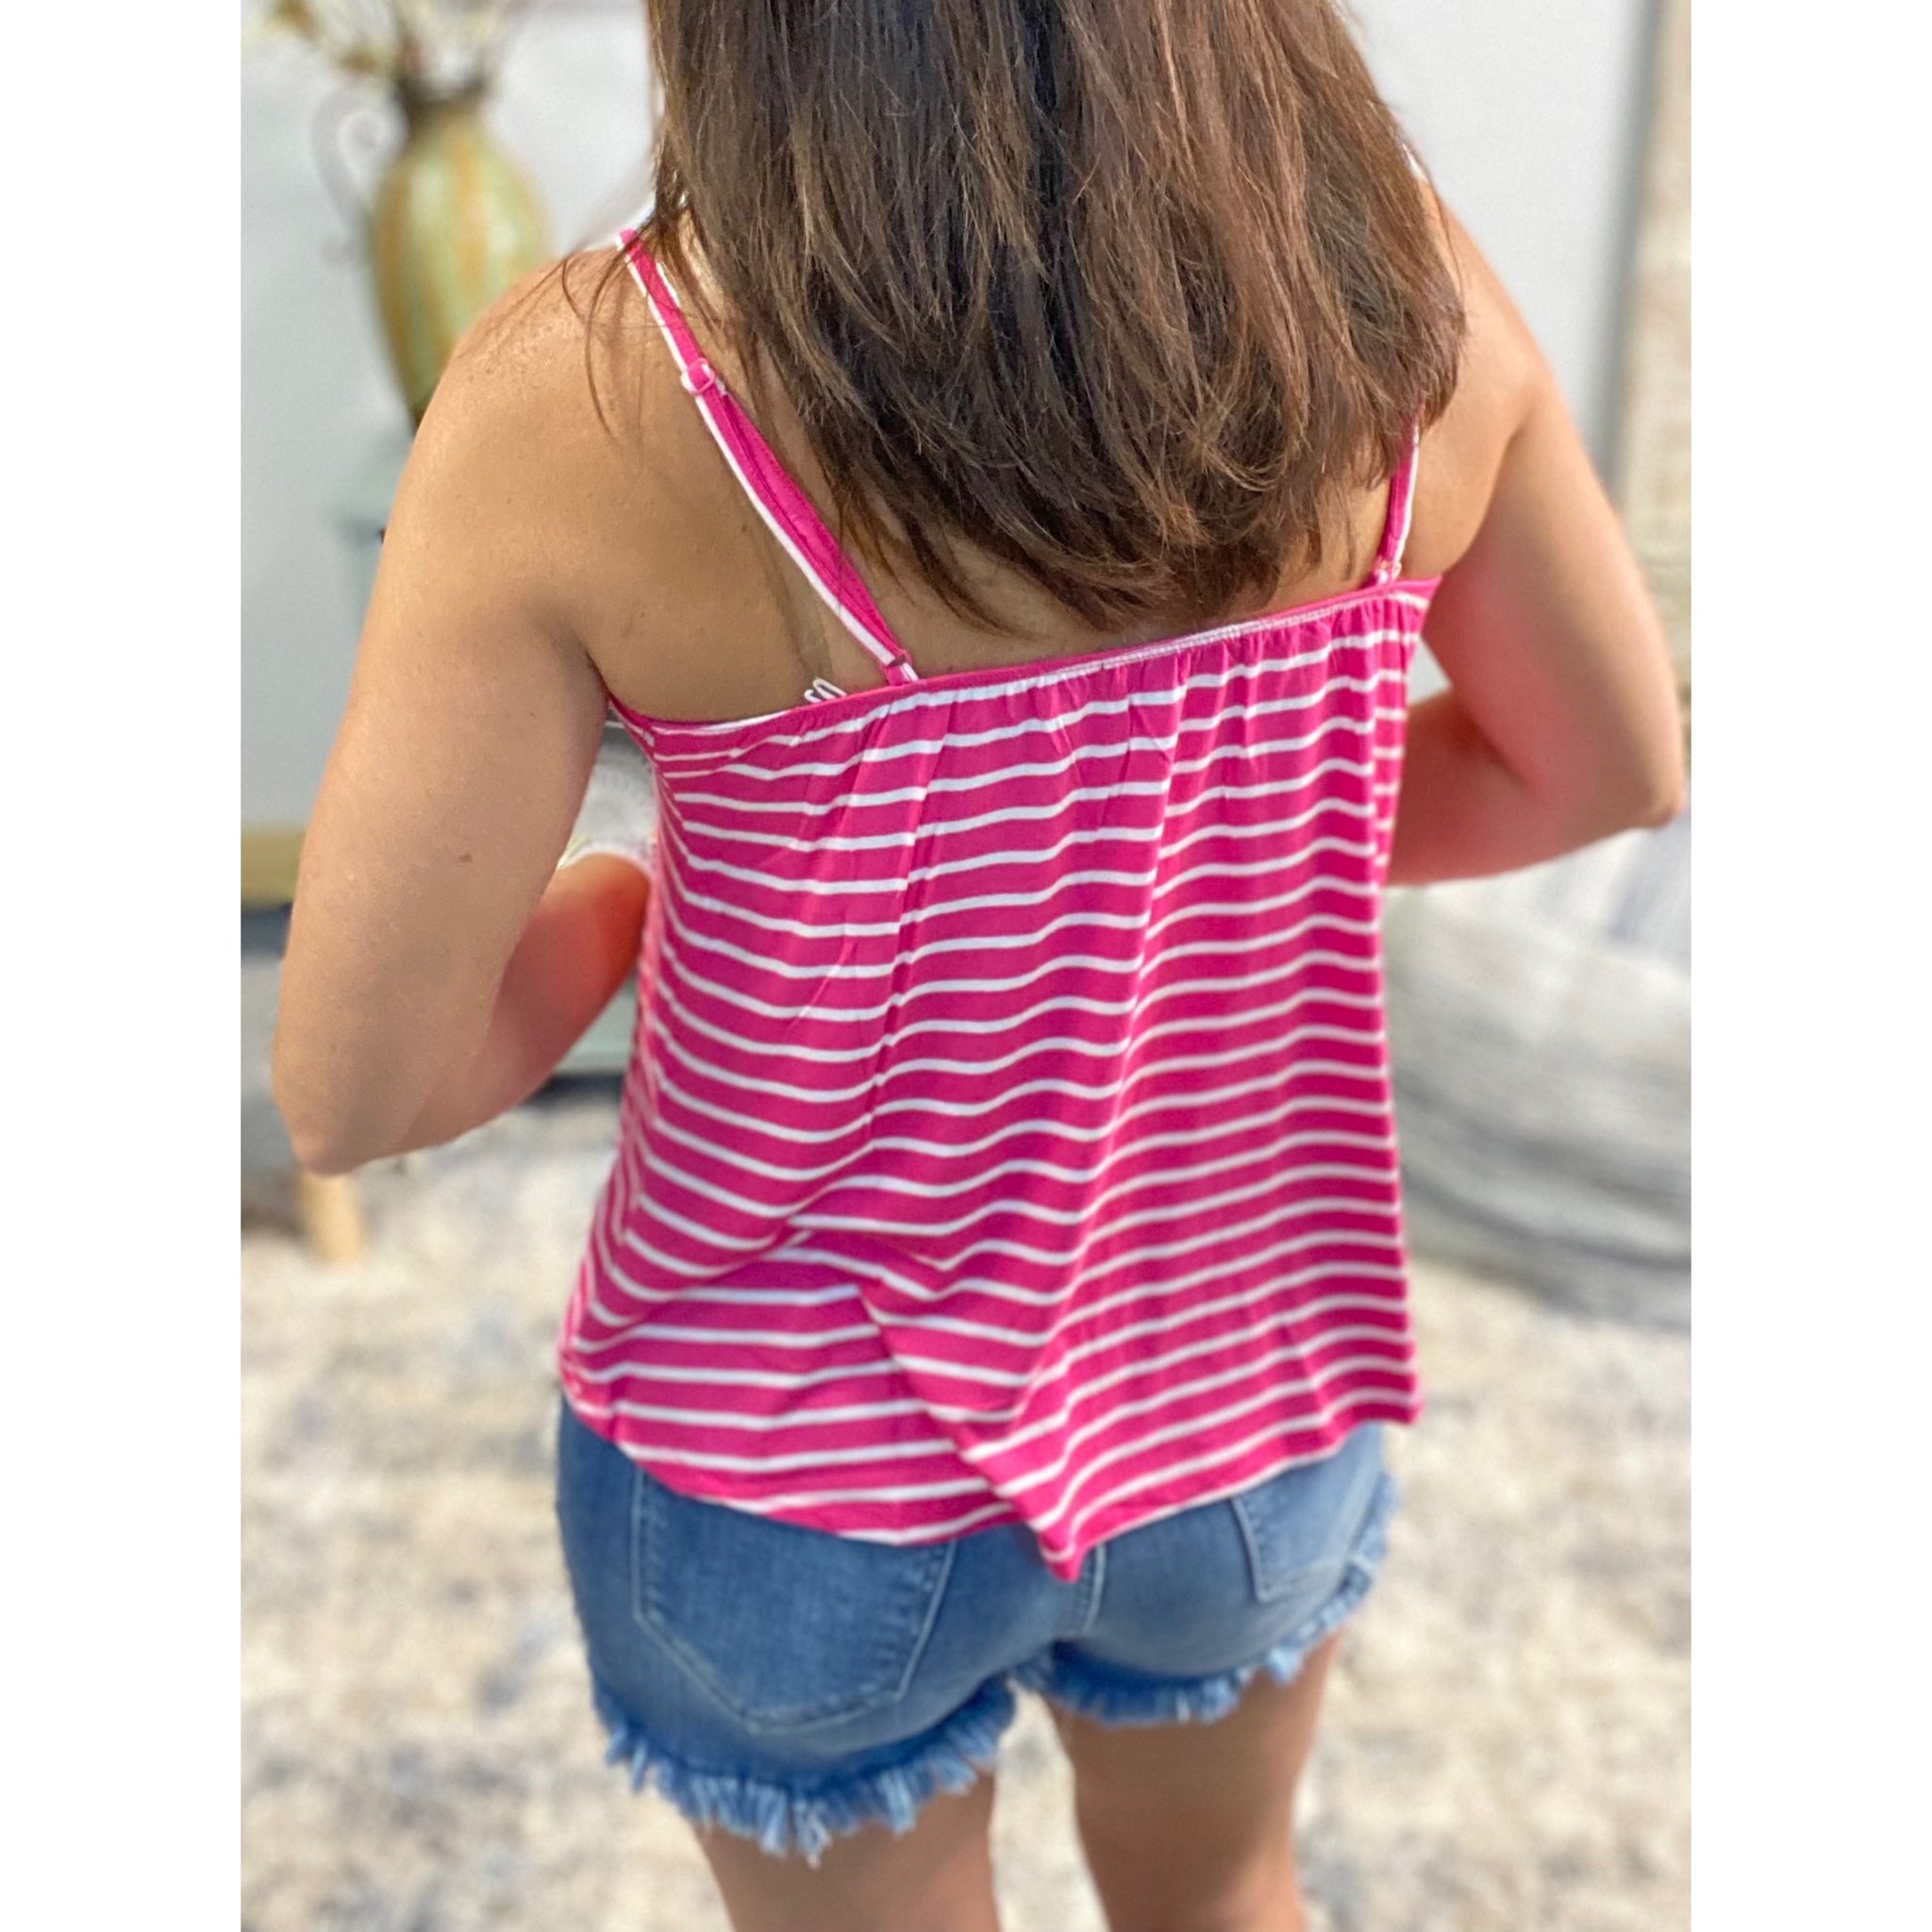 “On My Way” Striped Scoop Neck Faux Button Floaty Adjustable Spaghetti Strap Summer Tank Fuchsia Pink S/M/L